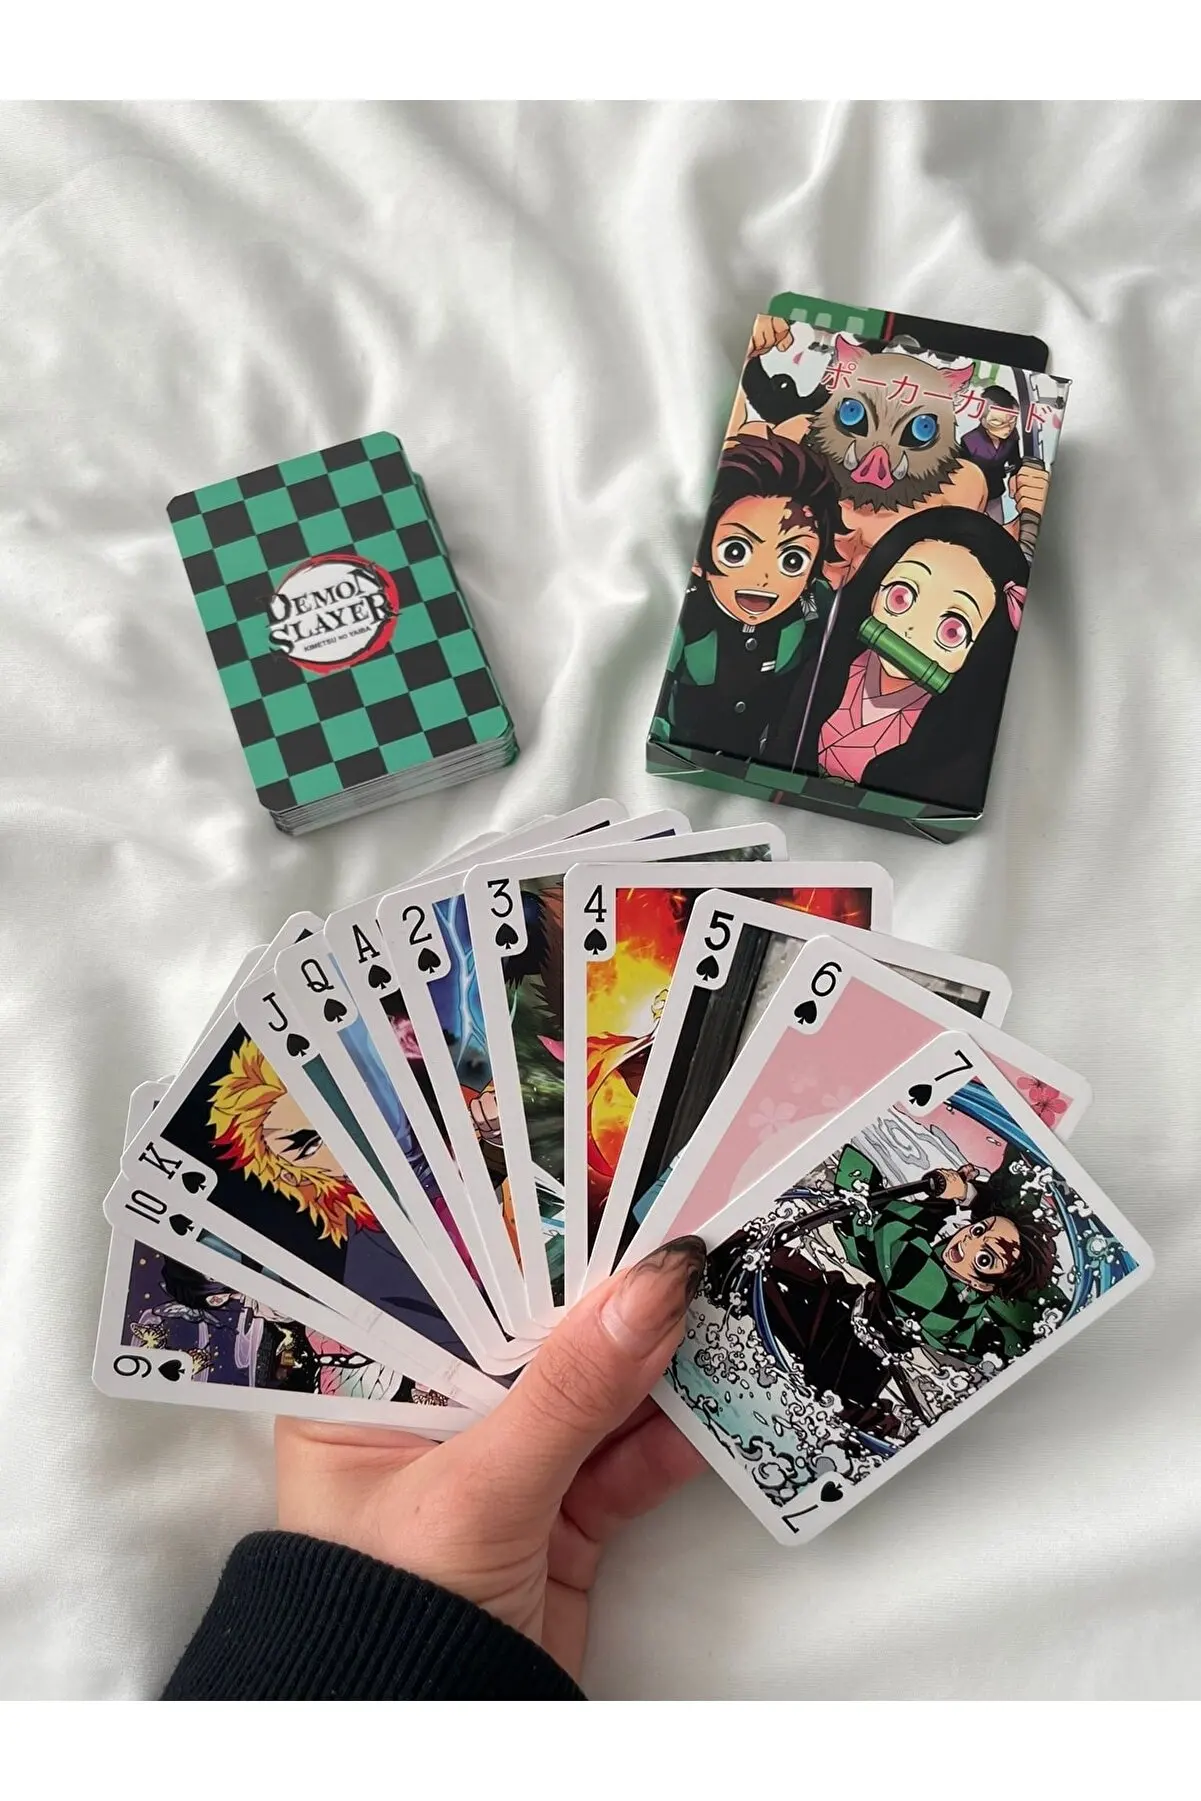 

Anime Boy Girl Themed Collection Playing Card Game Gambling Card For Fun Playing